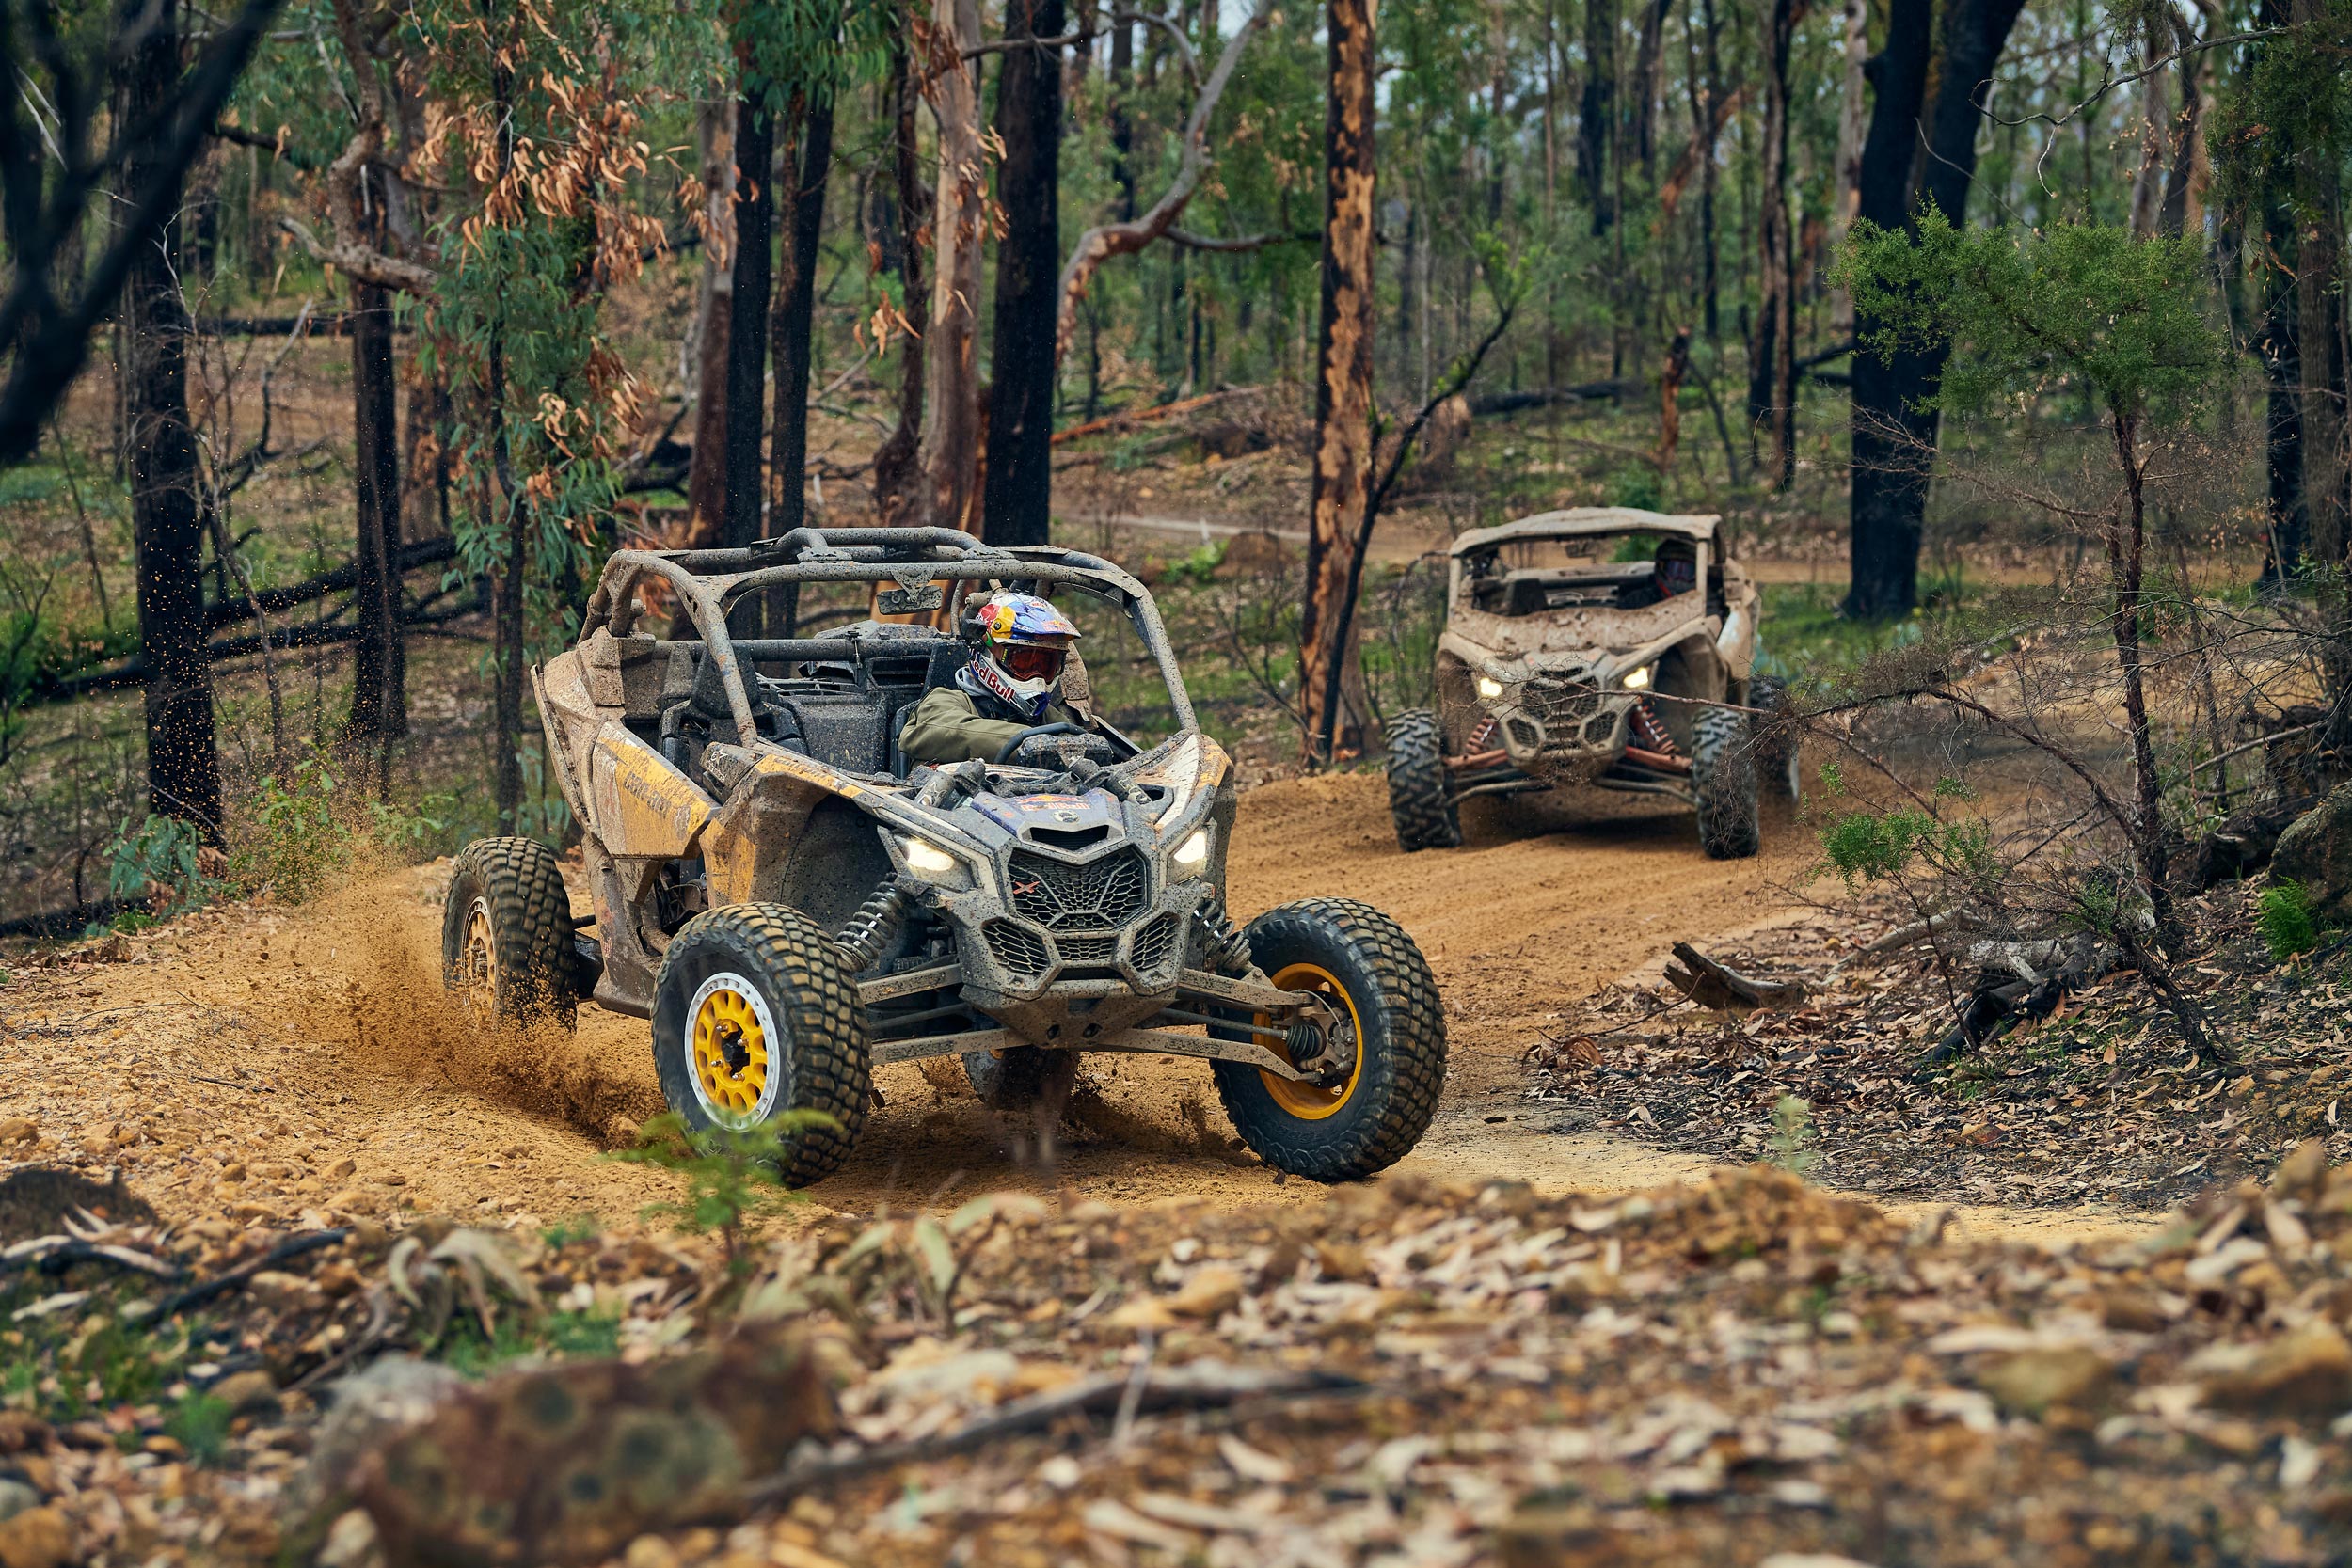 Can-Am SxS vehicles on a dirt road